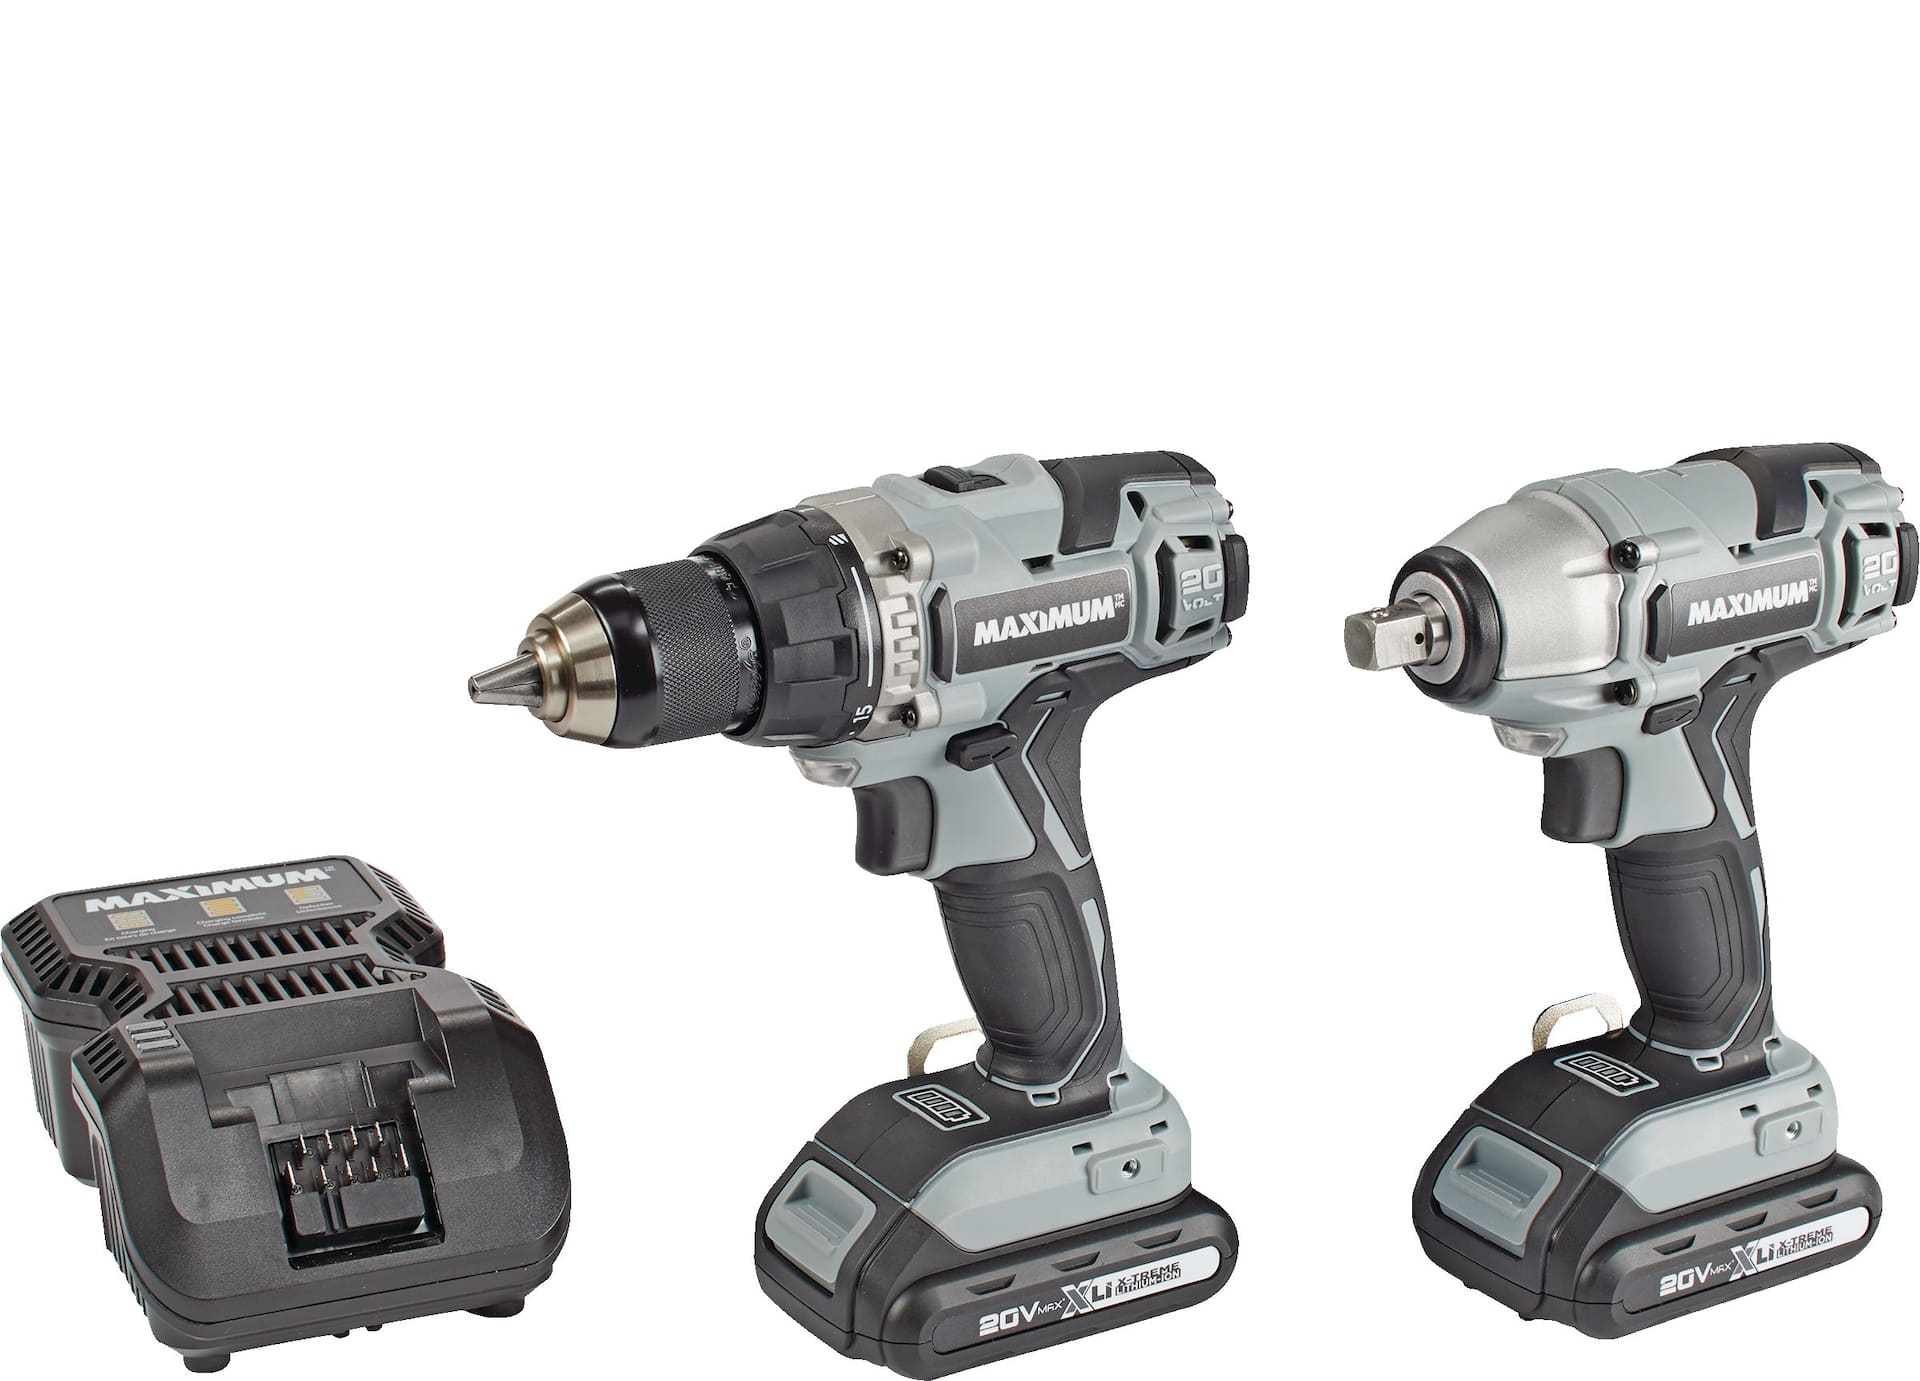 MAXIMUM 20V Max Lithium Ion Cordless Drill/Driver, Impact Wrench, Battery &  Charger Combo Kit